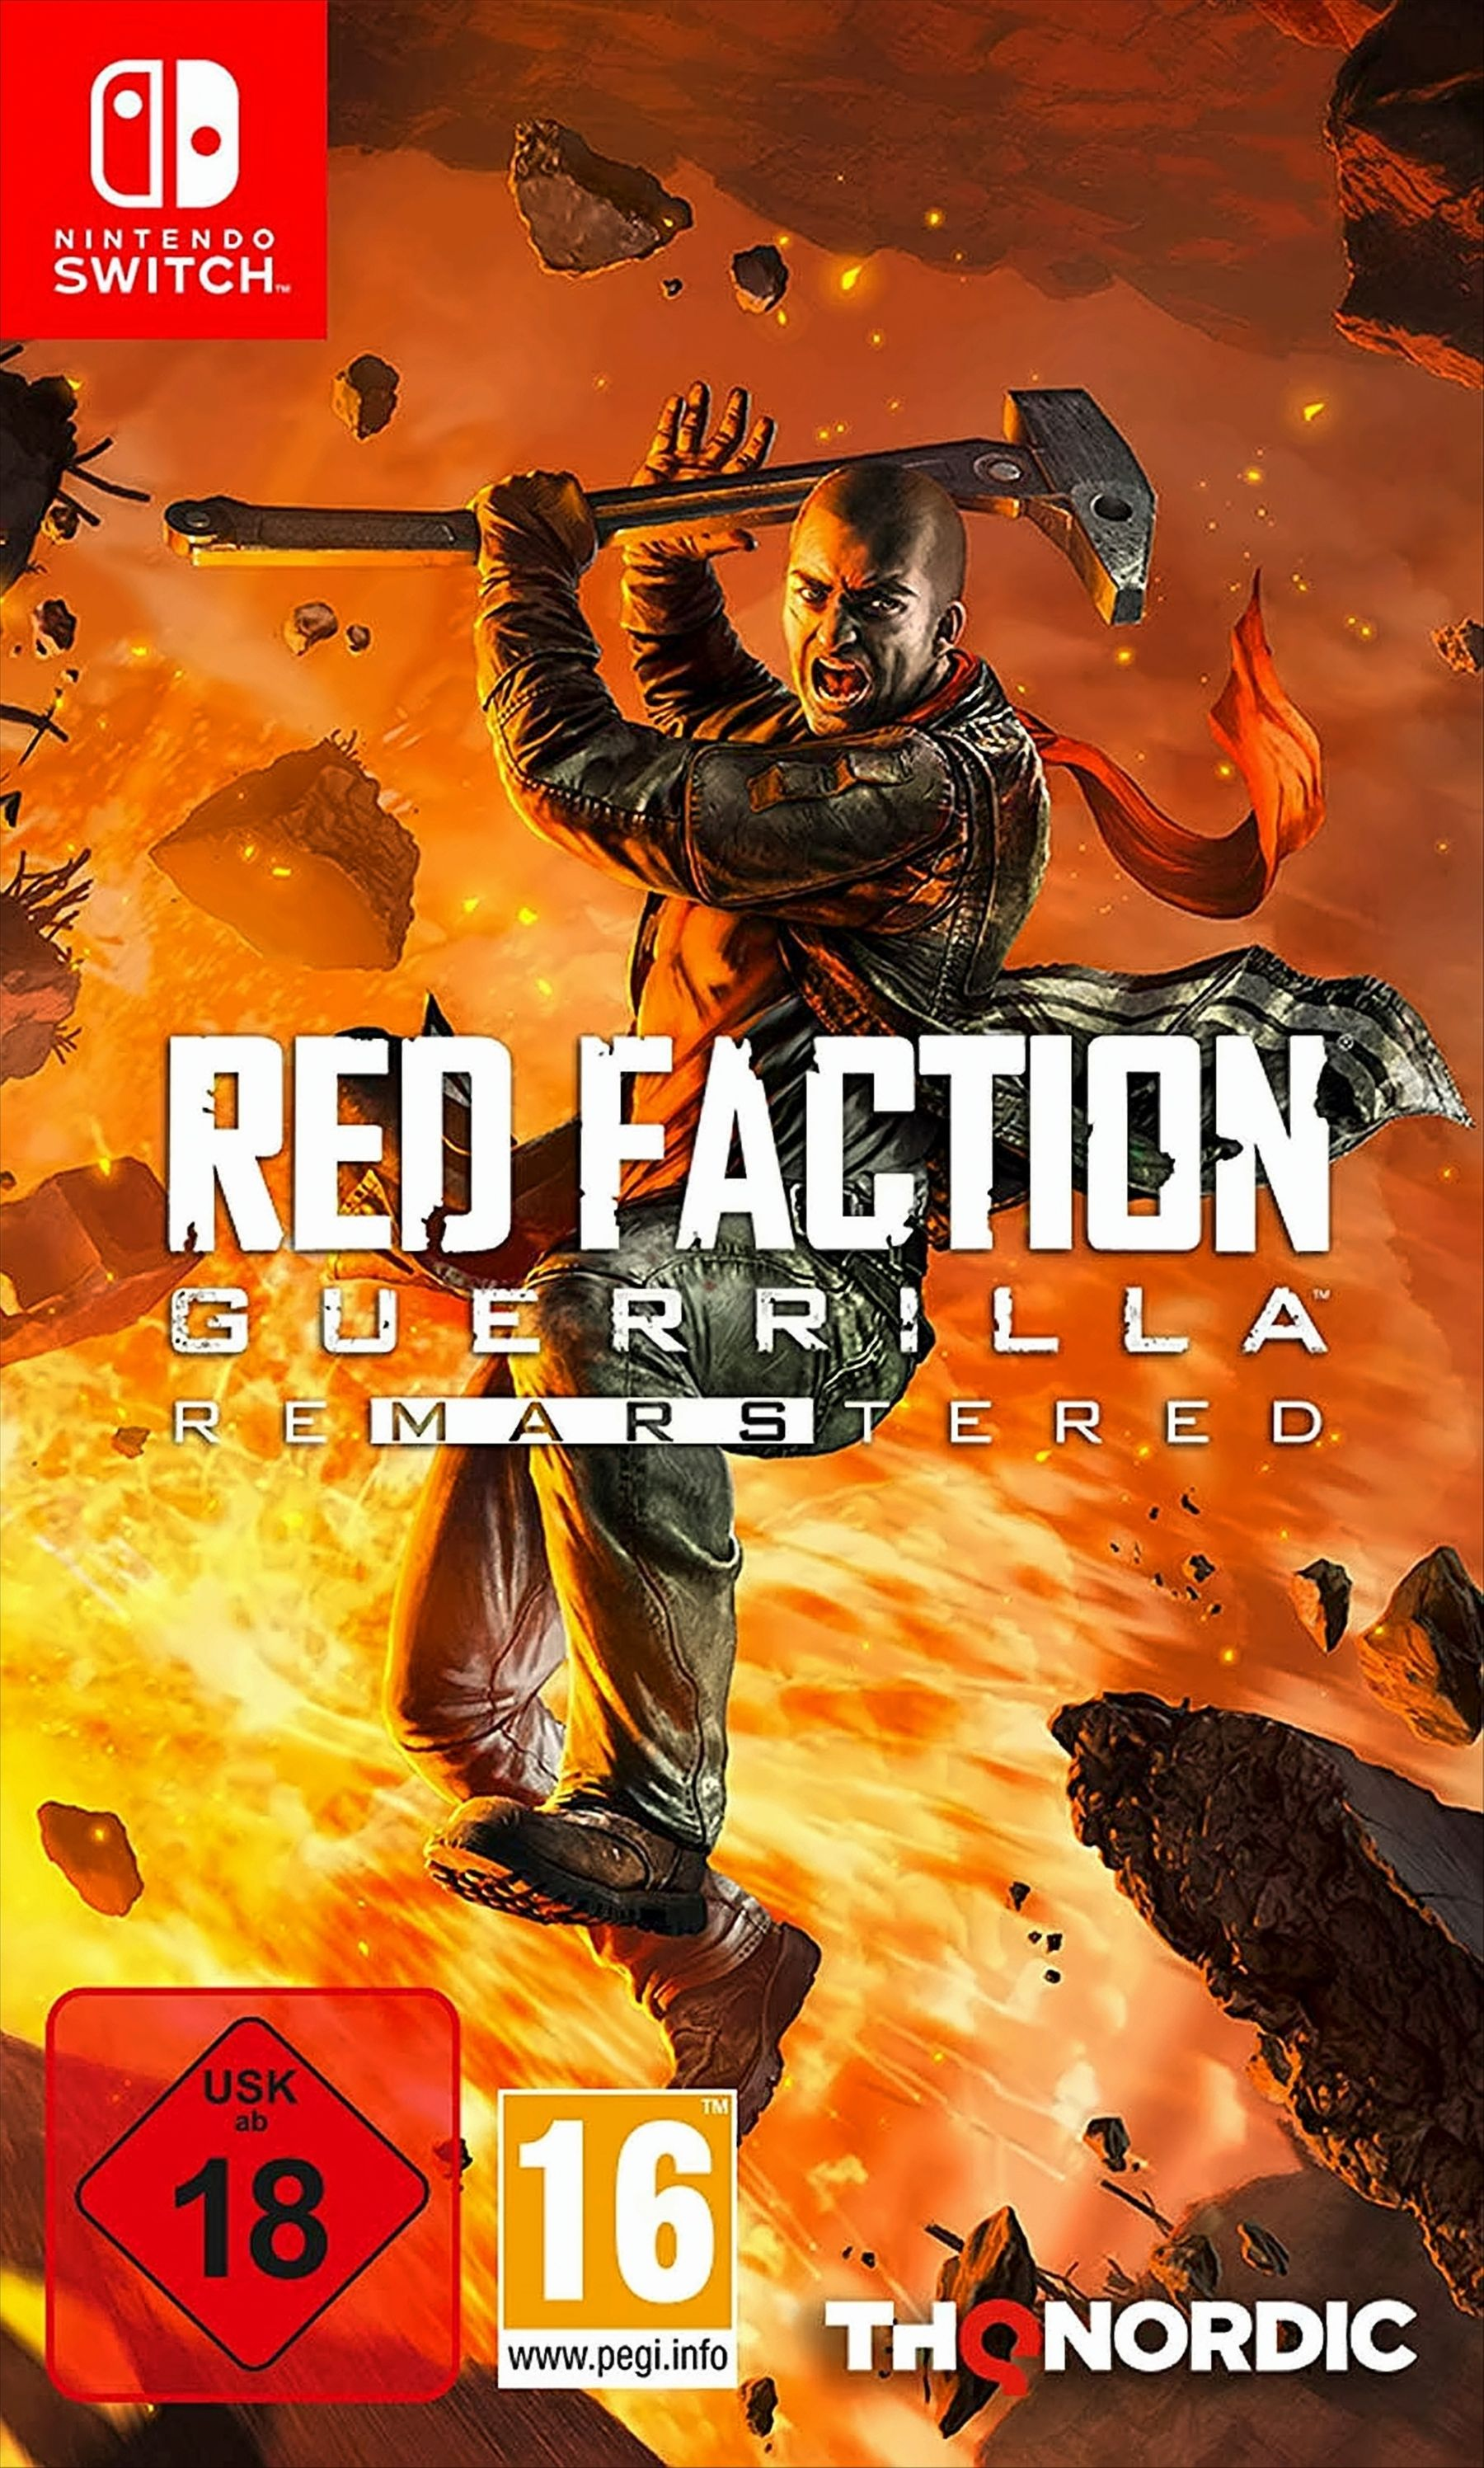 Red Faction Re-mars-tered - Guerrilla Switch] [Nintendo